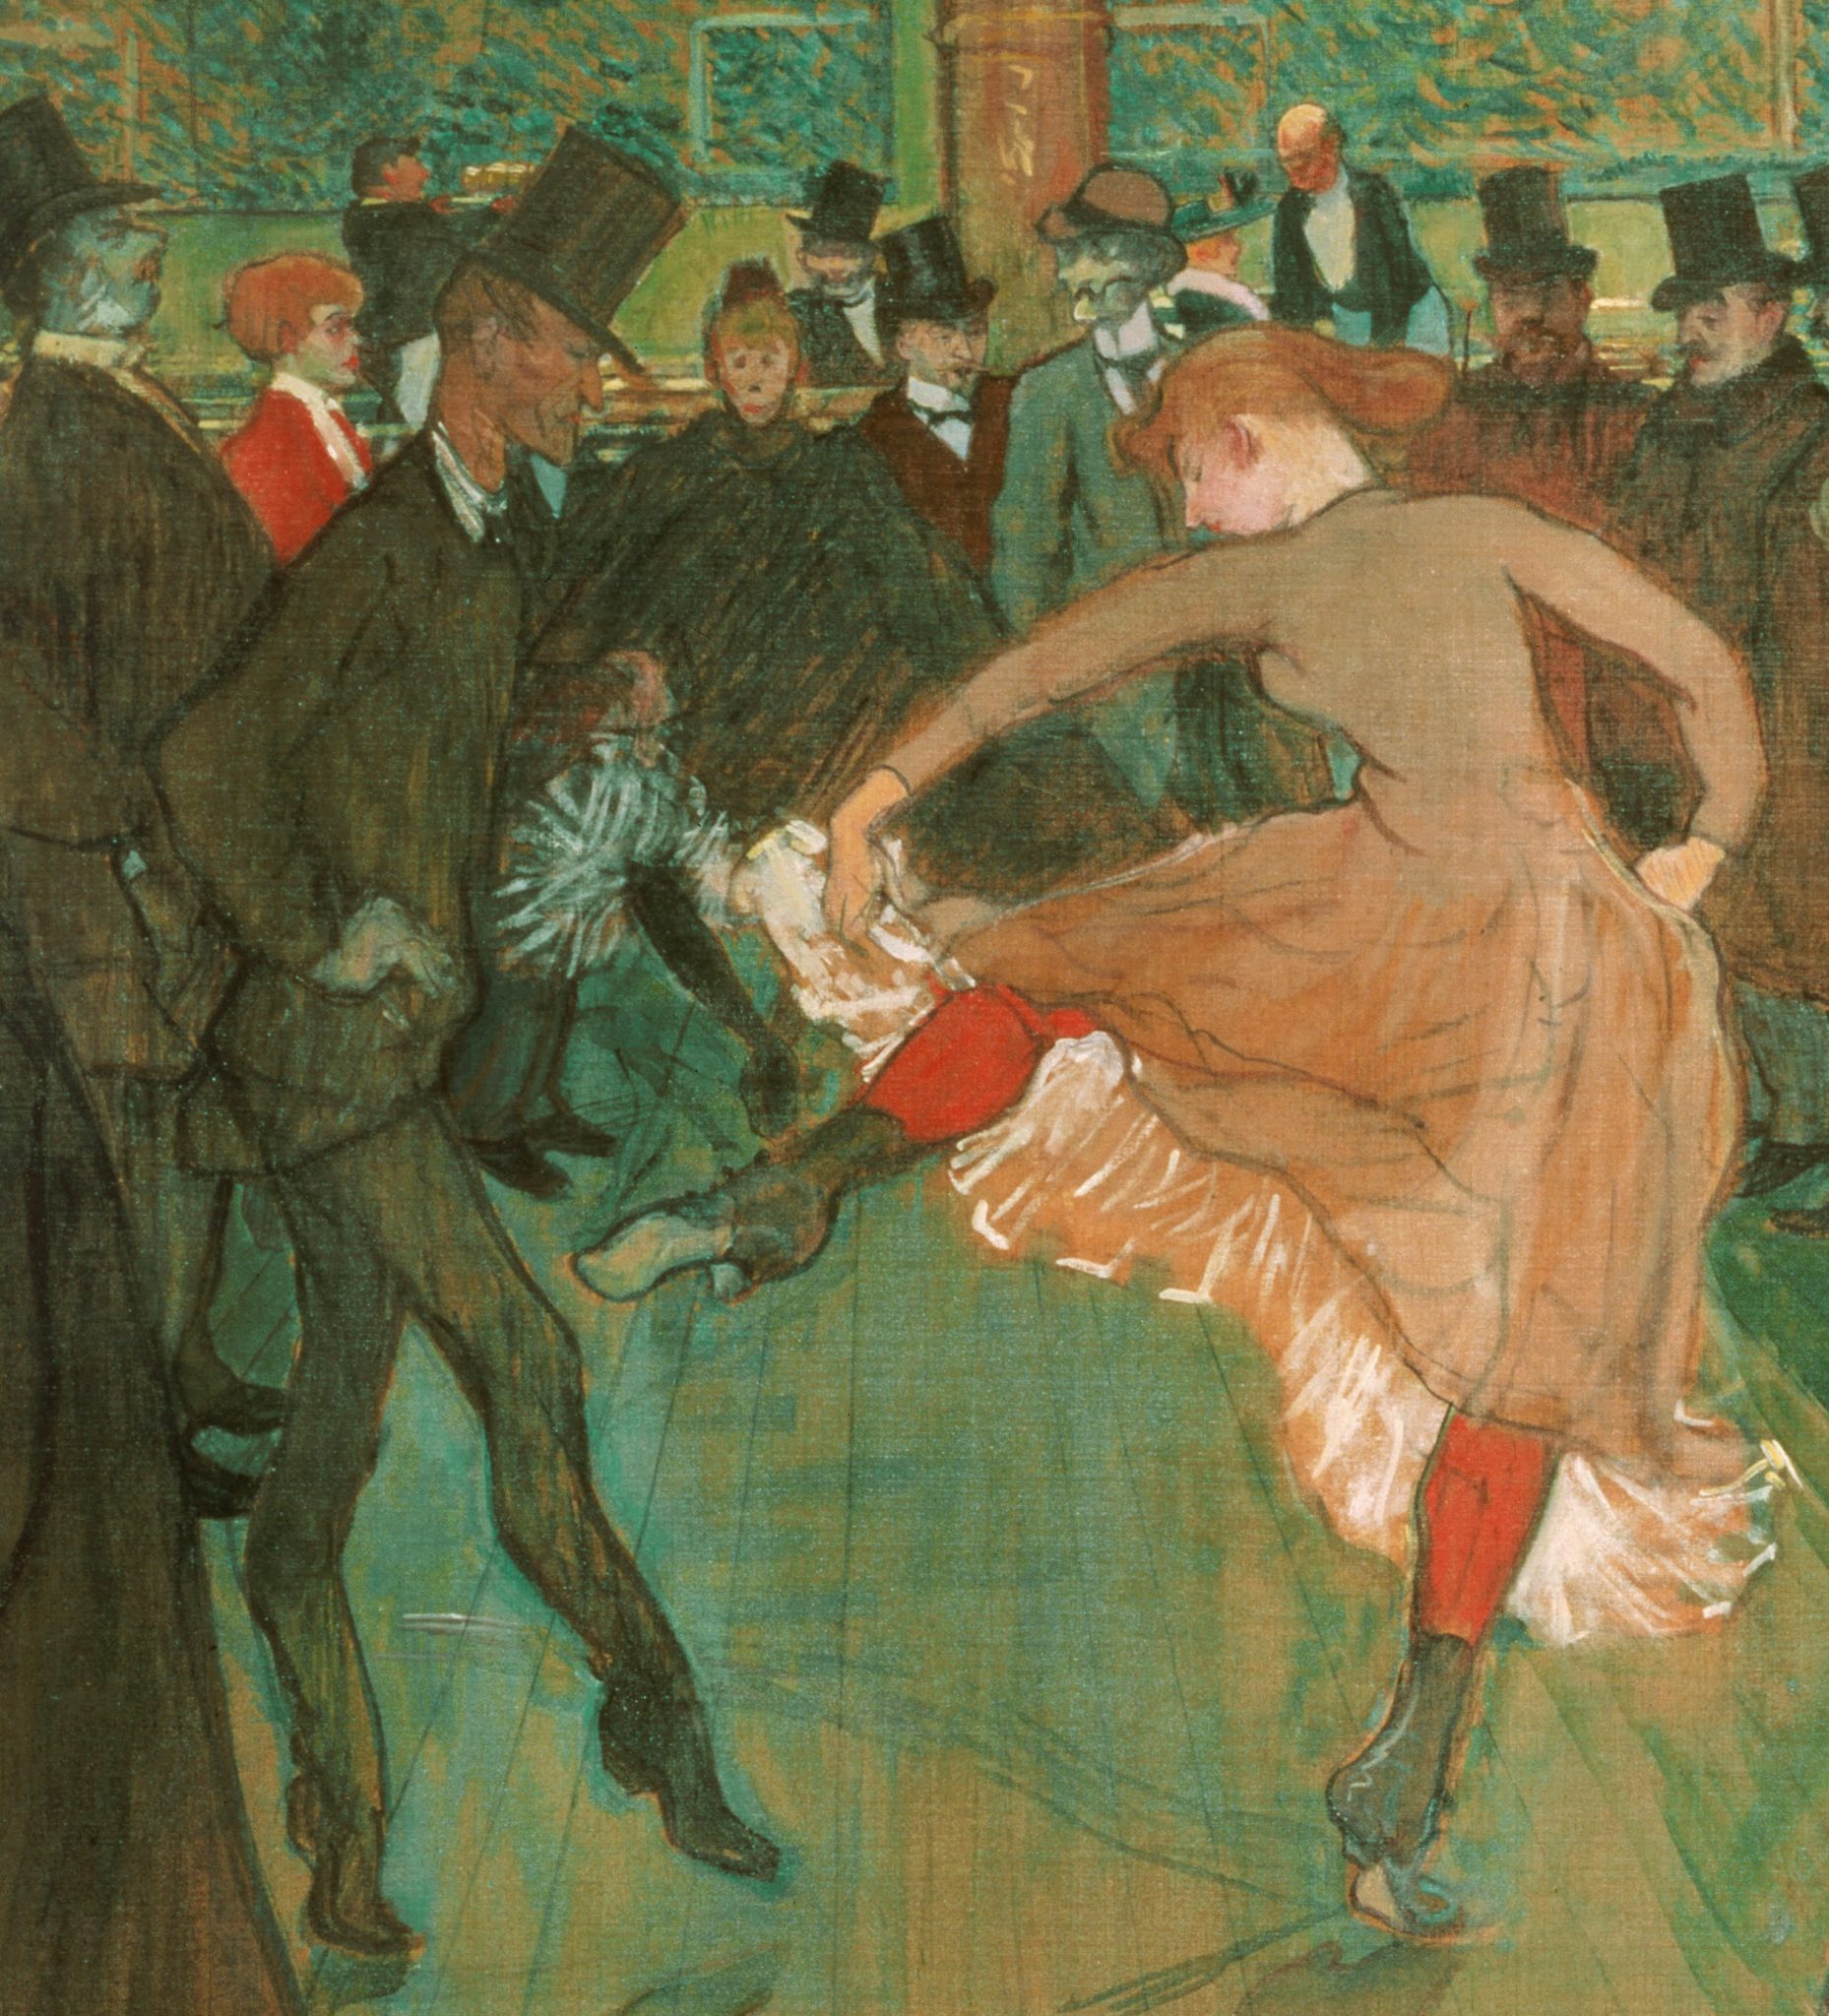 At the Moulin Rouge by Toulouse-Lautrec | DailyArt Magazine